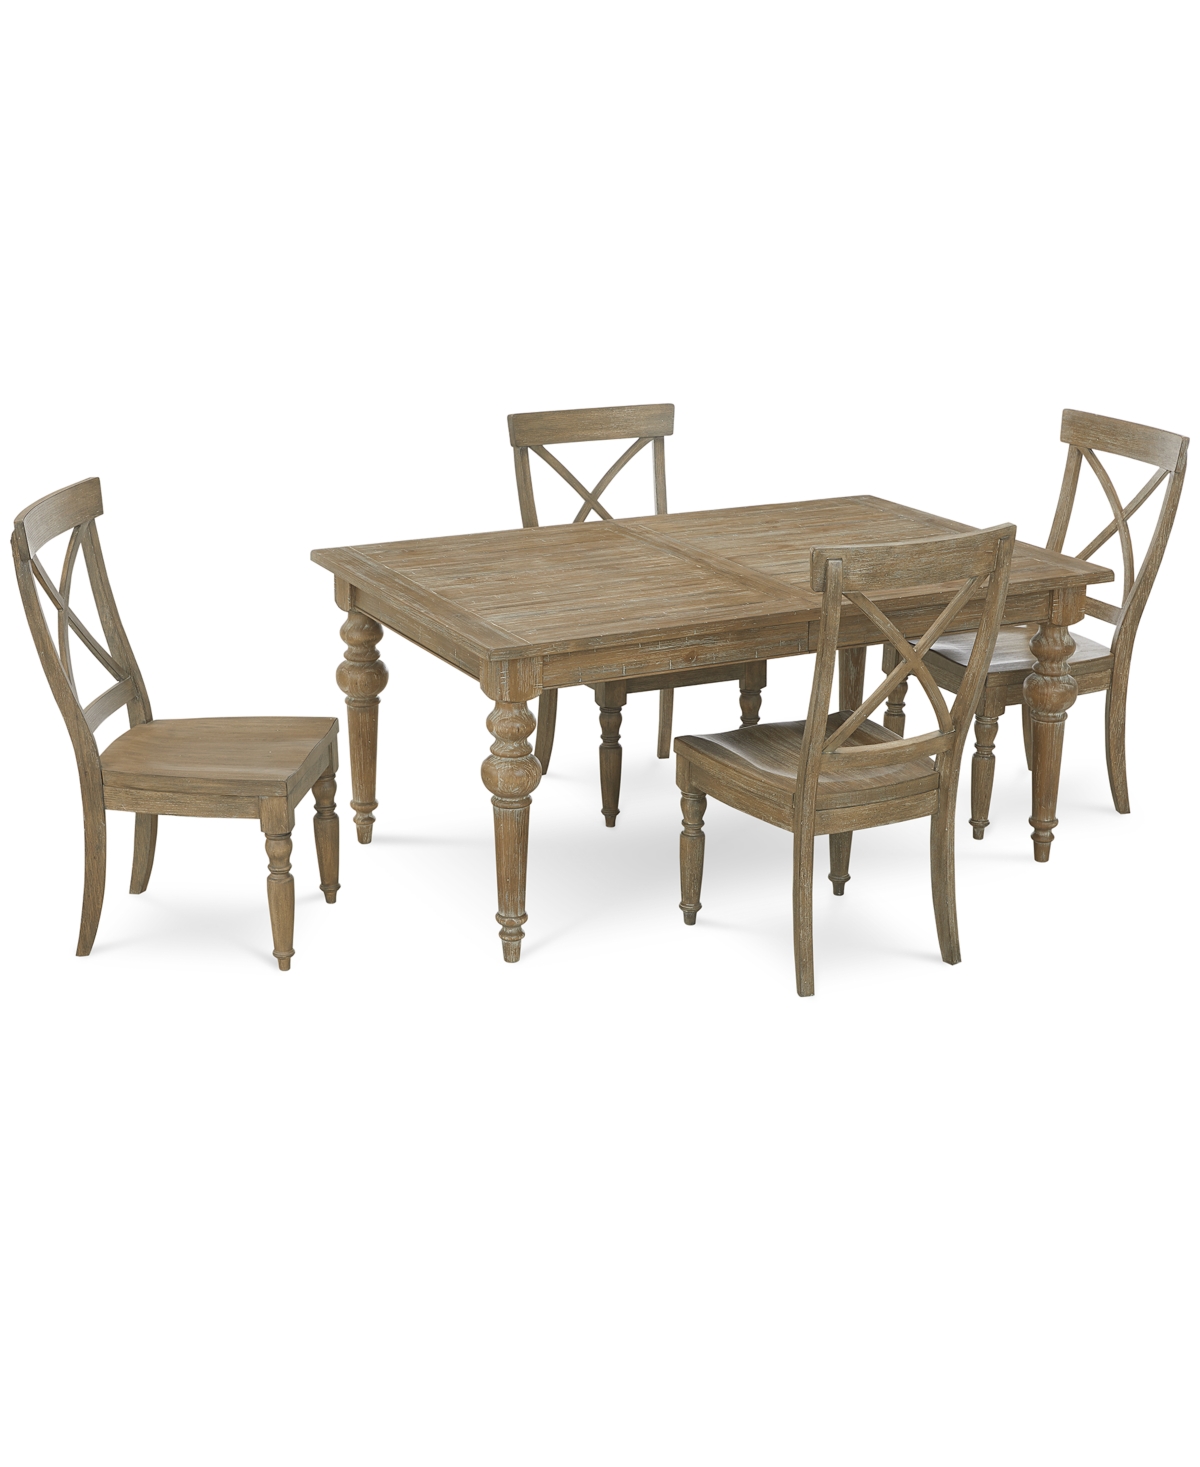 Furniture Sonora 5-pc. Dining Set (rectangular Table + 4 X-back Side Chairs)